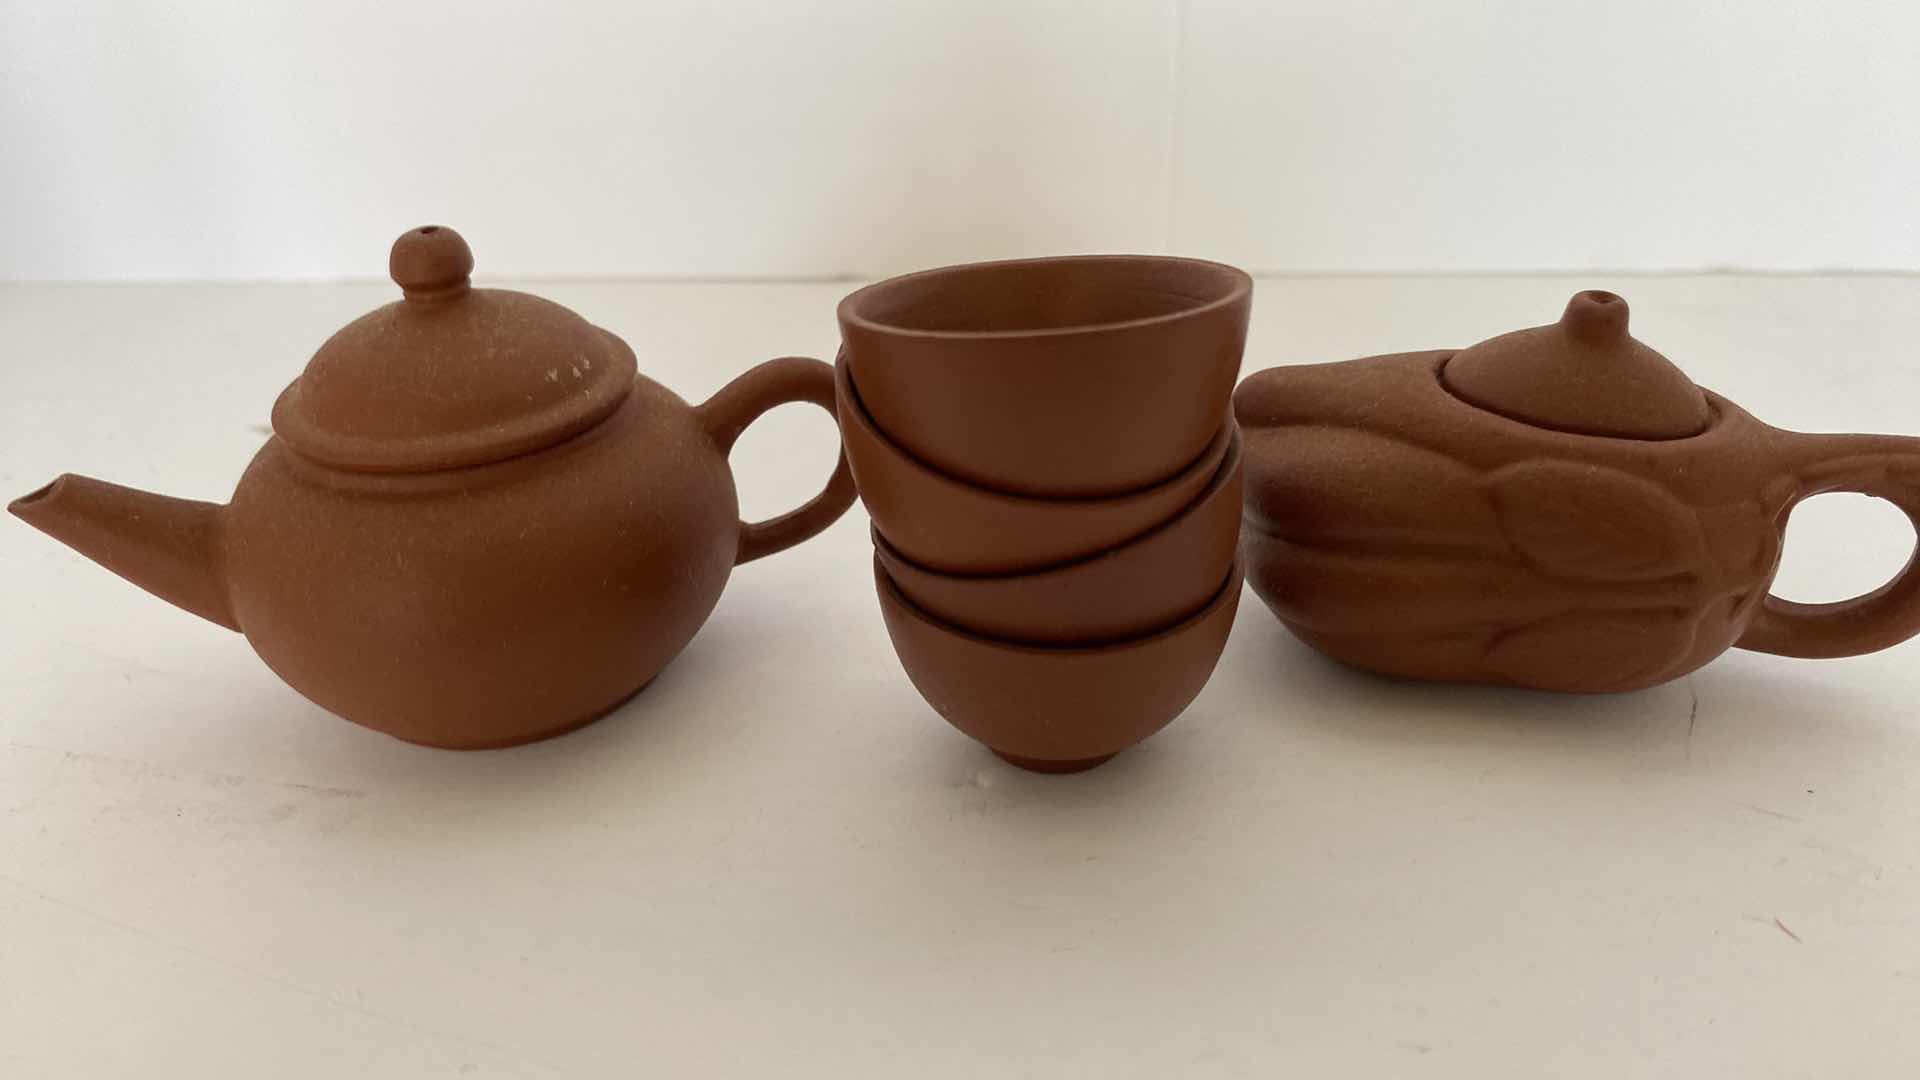 Photo 7 of PAIR OF VINTAGE CHINESE COLLECTIBLE CLAY TEA POTS WITH 4 TEA CUPS LARGEST TEAPOT 3” x 1 7/8”